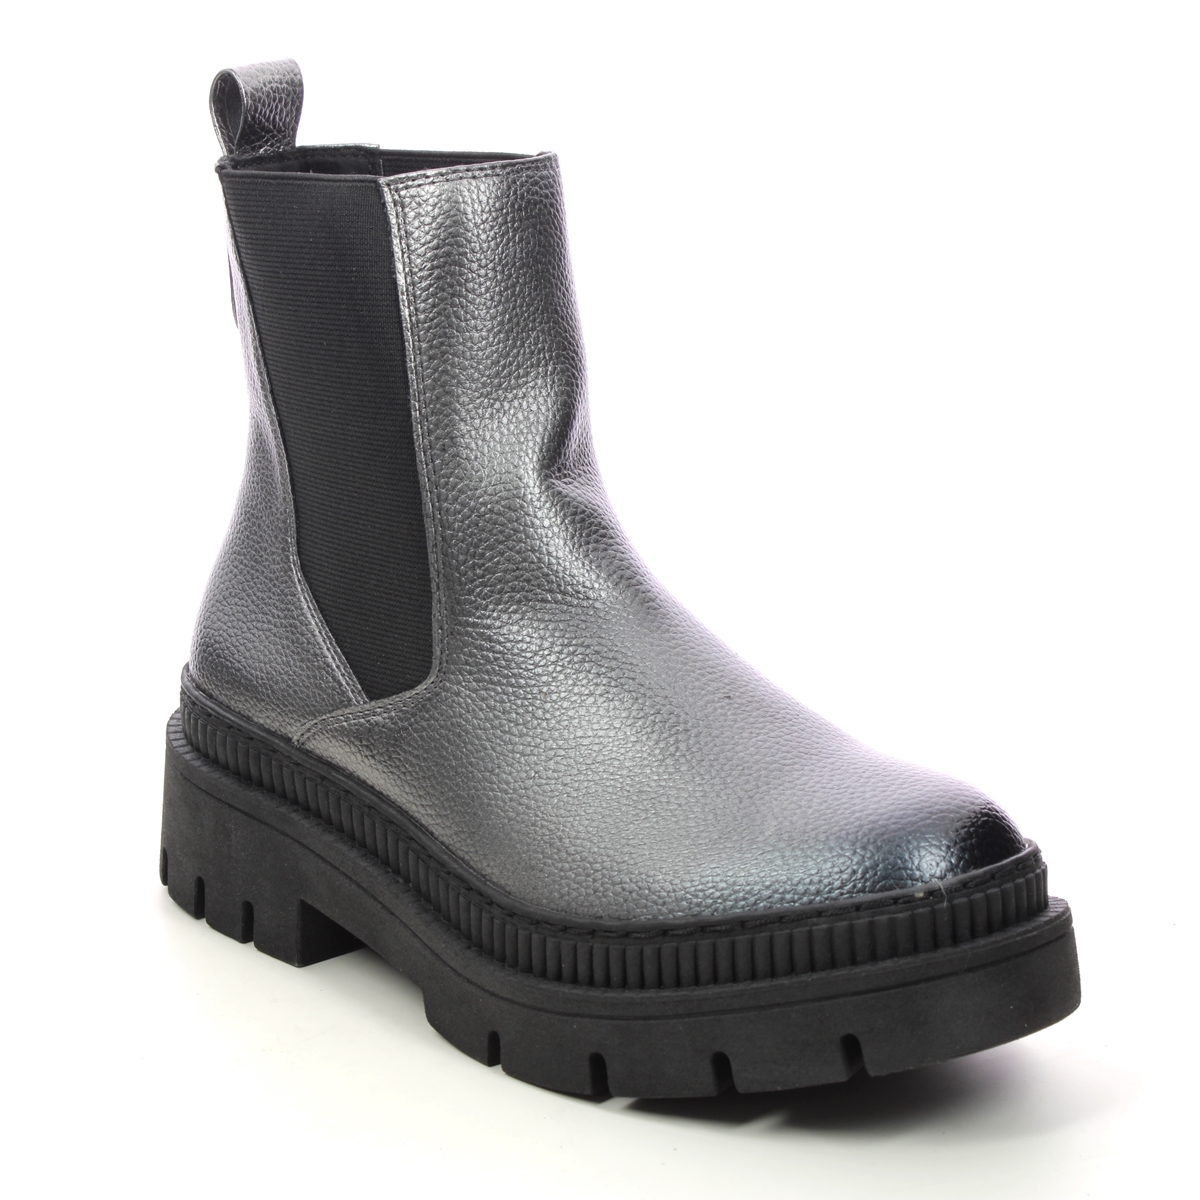 Marco Tozzi Rostra Chelsea Pewter Womens Chelsea Boots 25822-41-915 in a Plain Man-made in Size 38